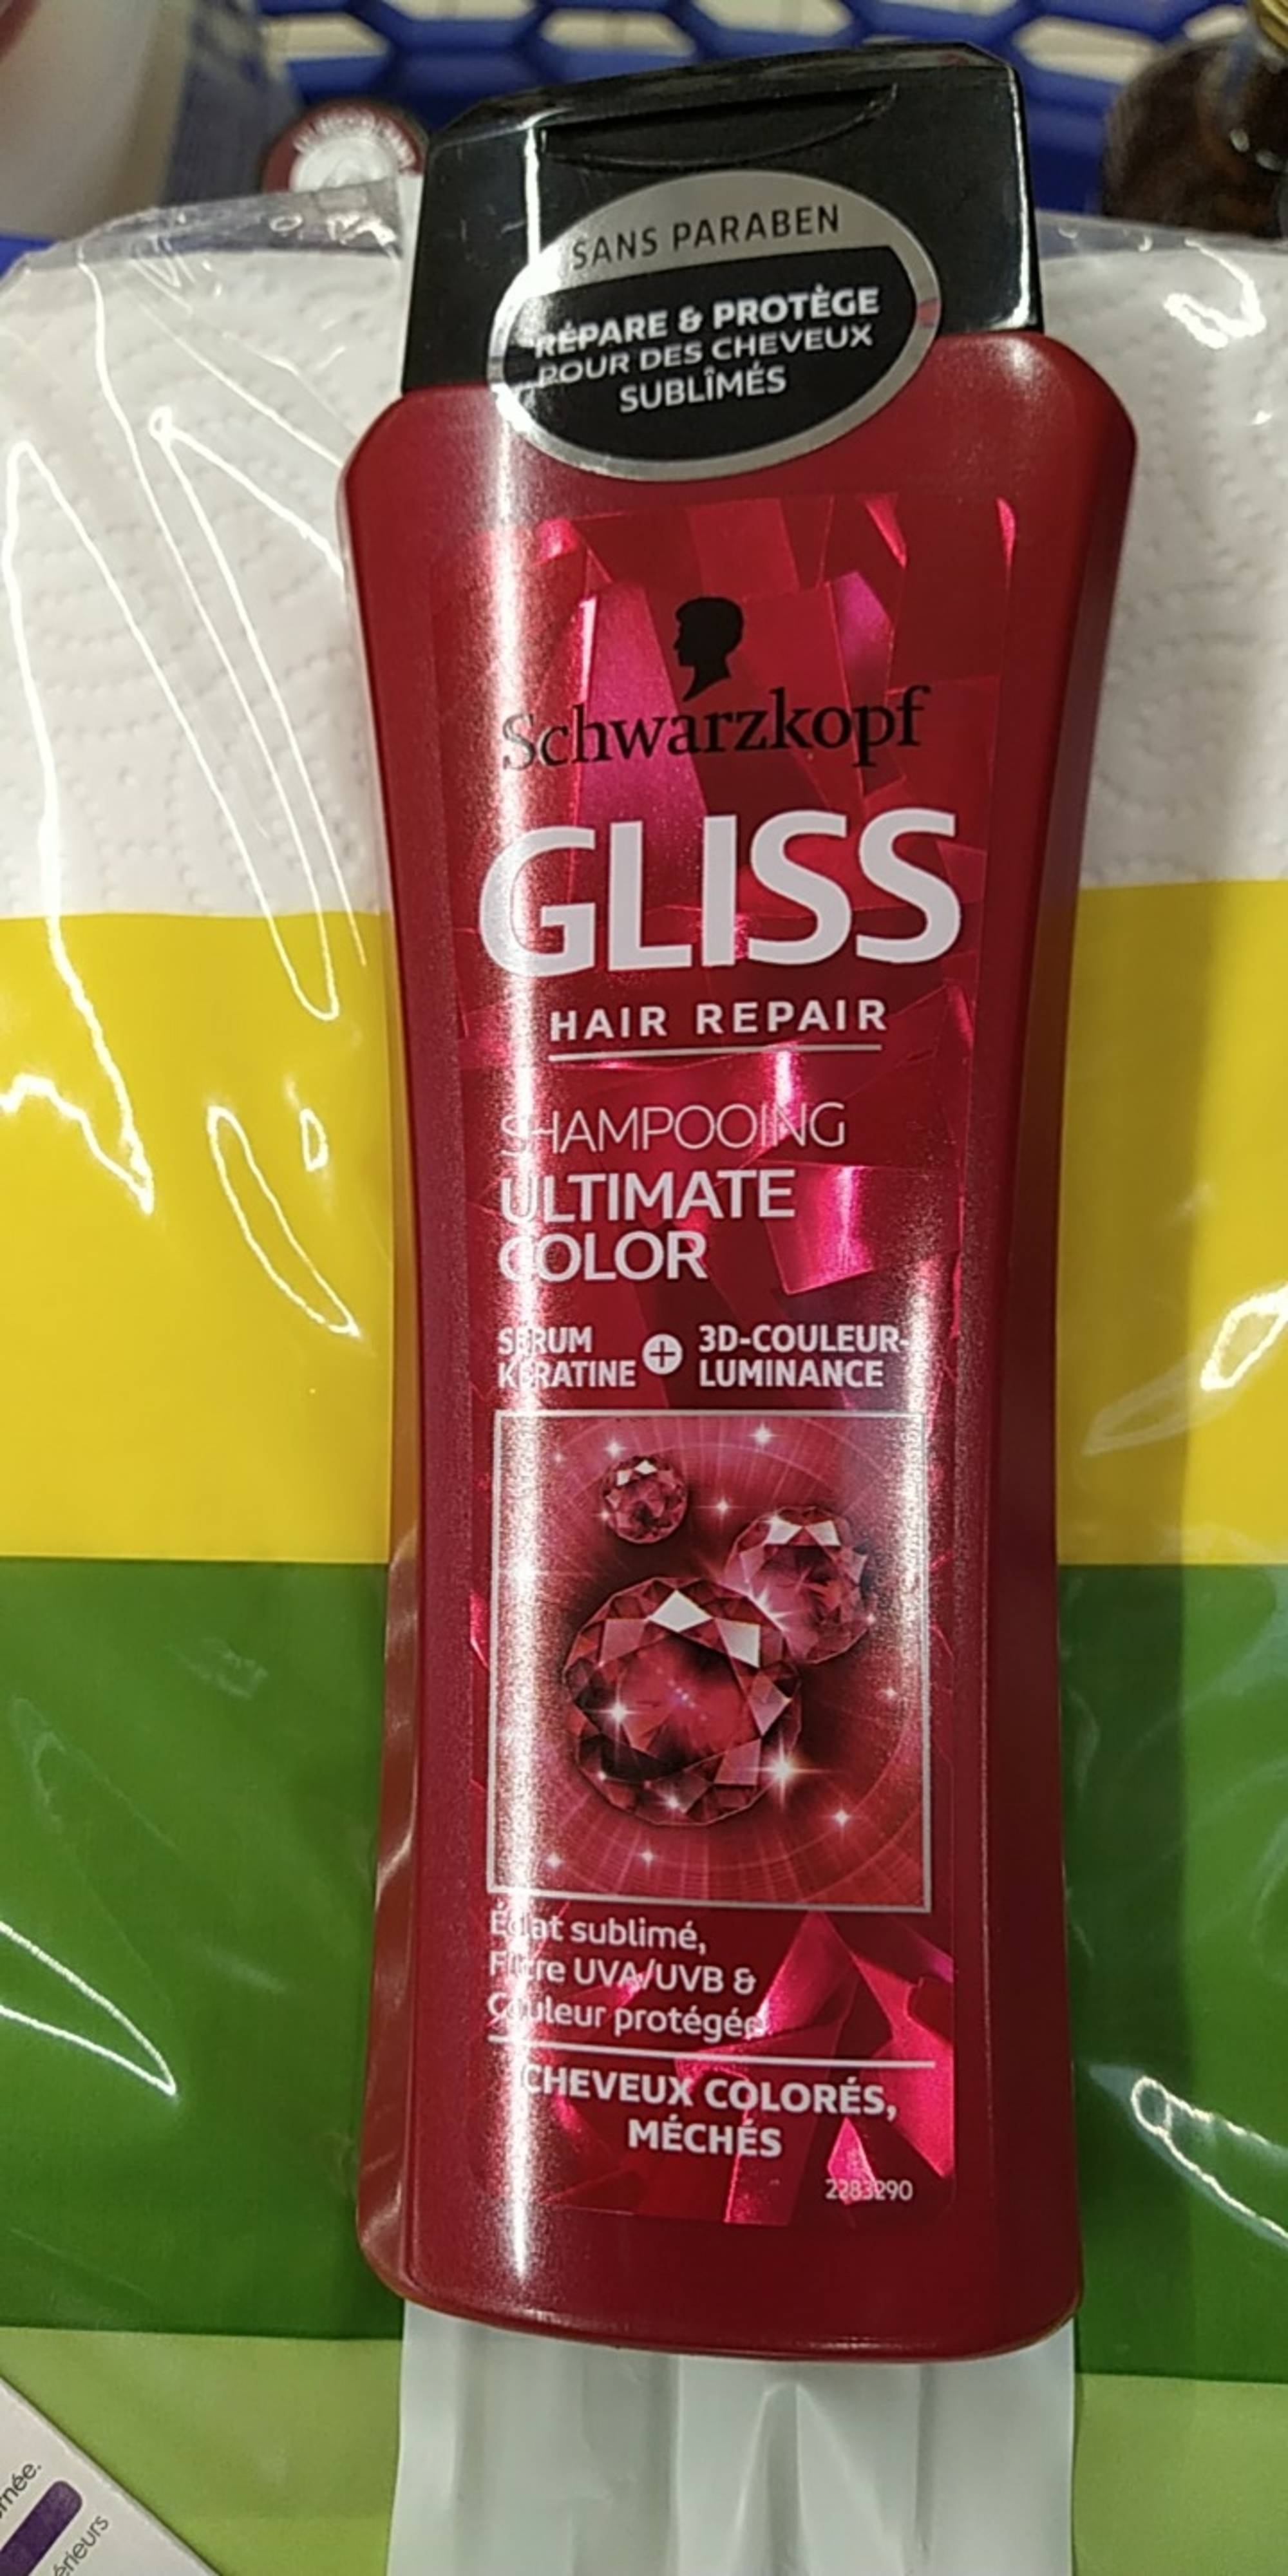 SCHWARZKOPF - Gliss - Shampooing ultimate color